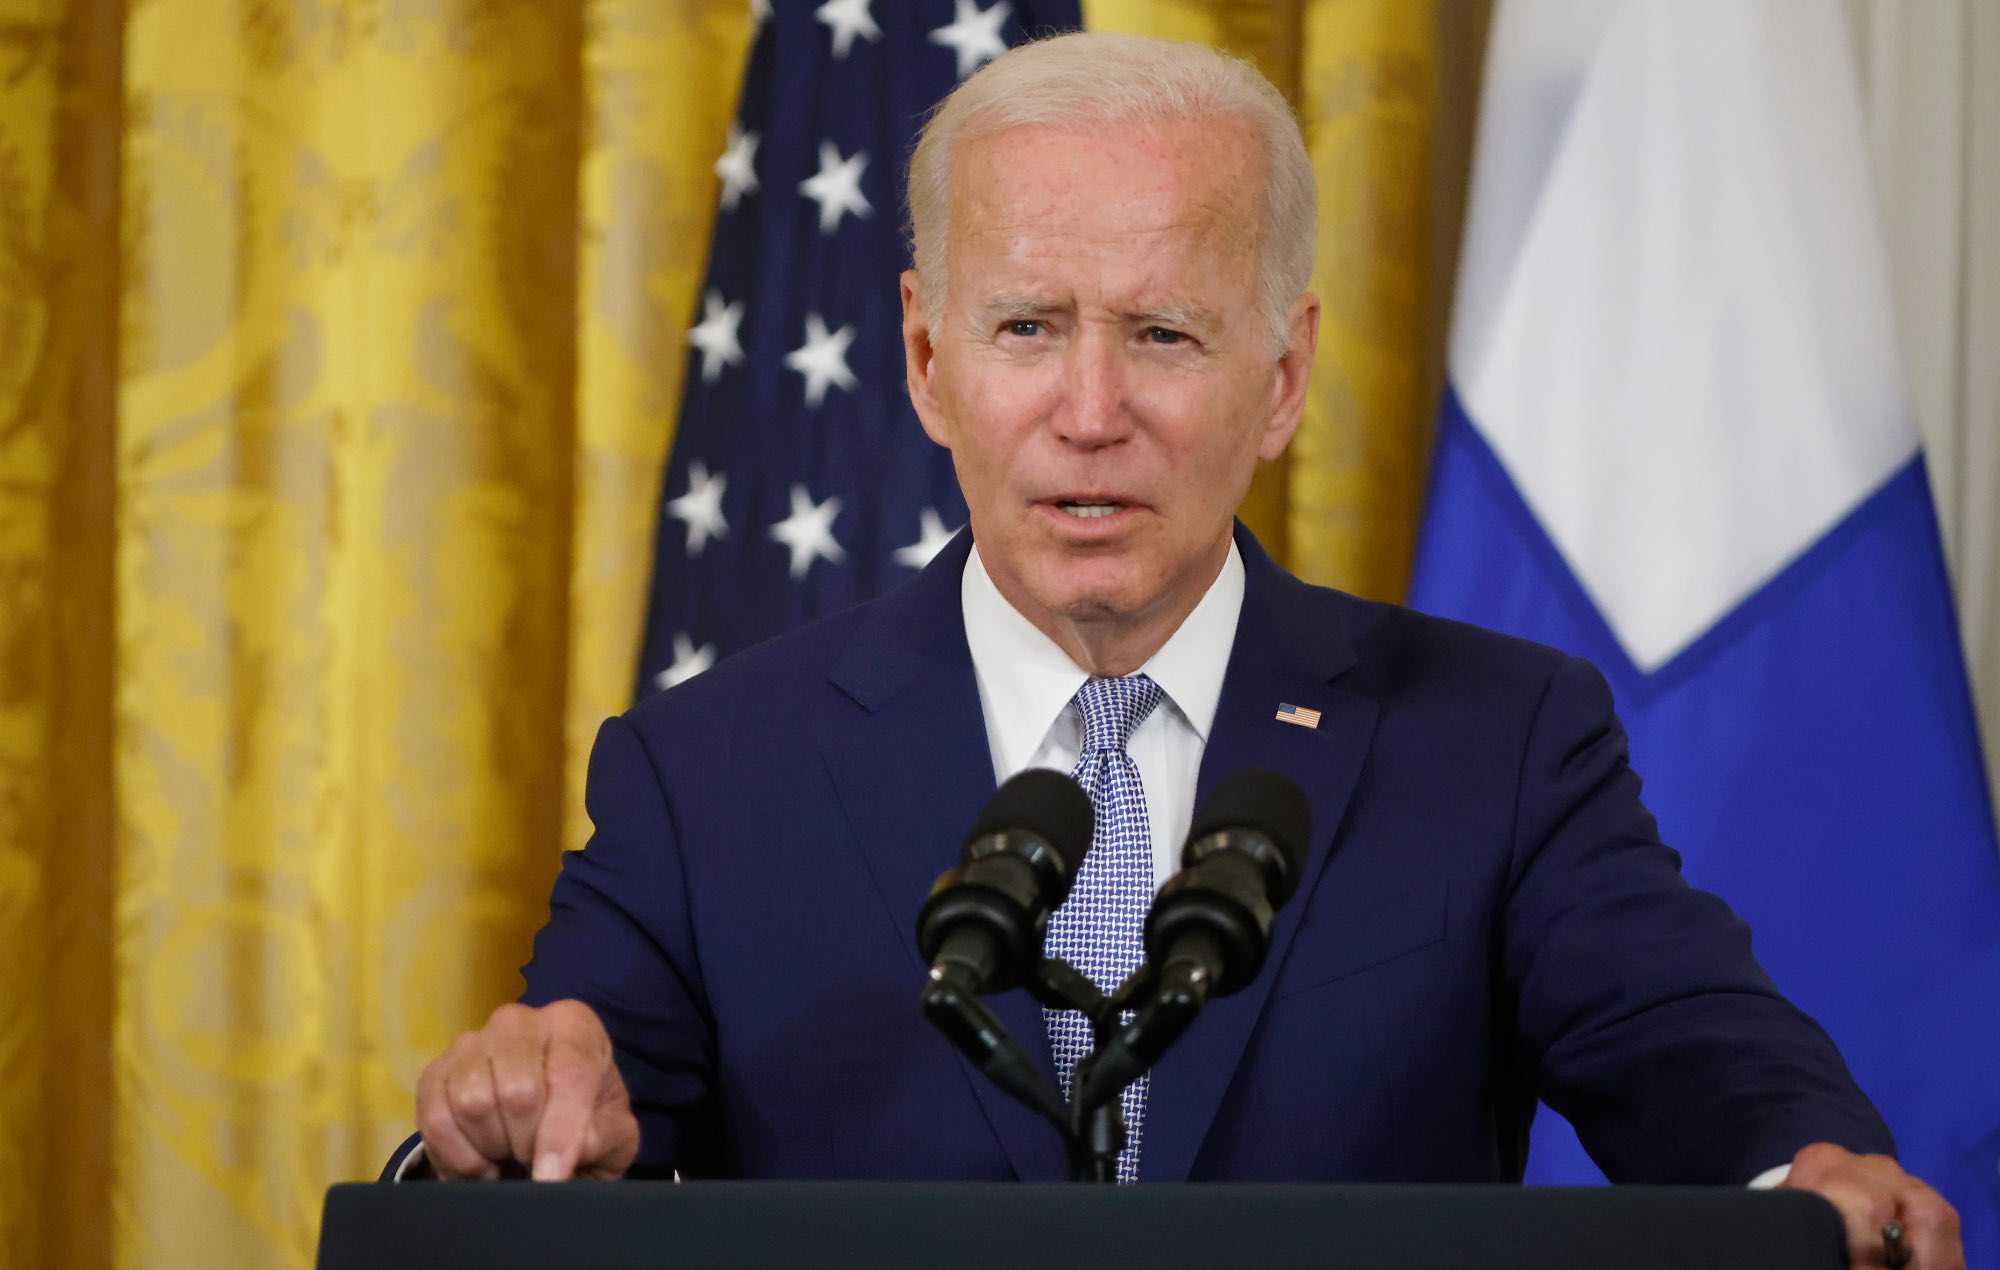 Entertainment world reacts to Joe Biden dropping out of the US presidential race